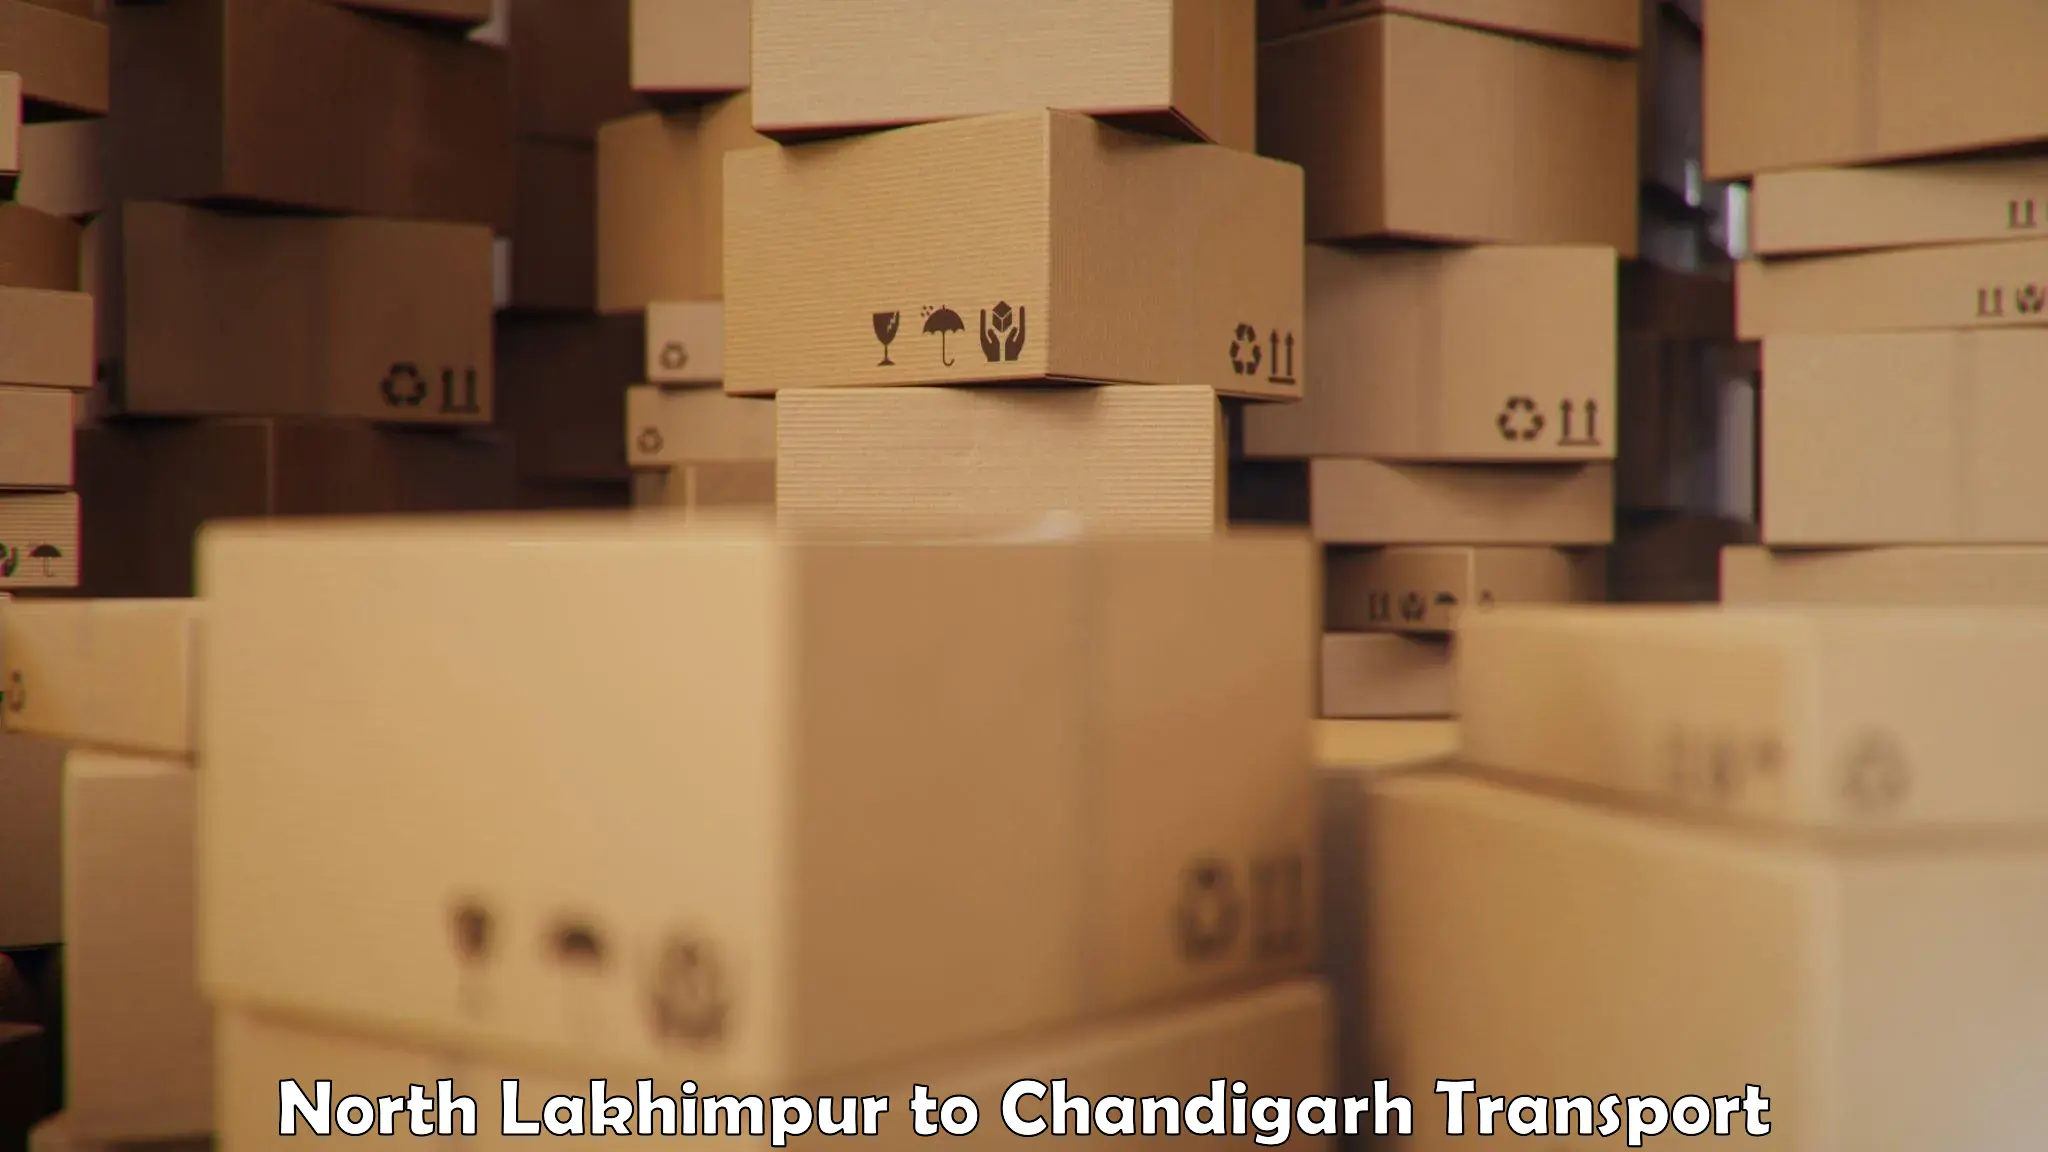 Truck transport companies in India in North Lakhimpur to Chandigarh